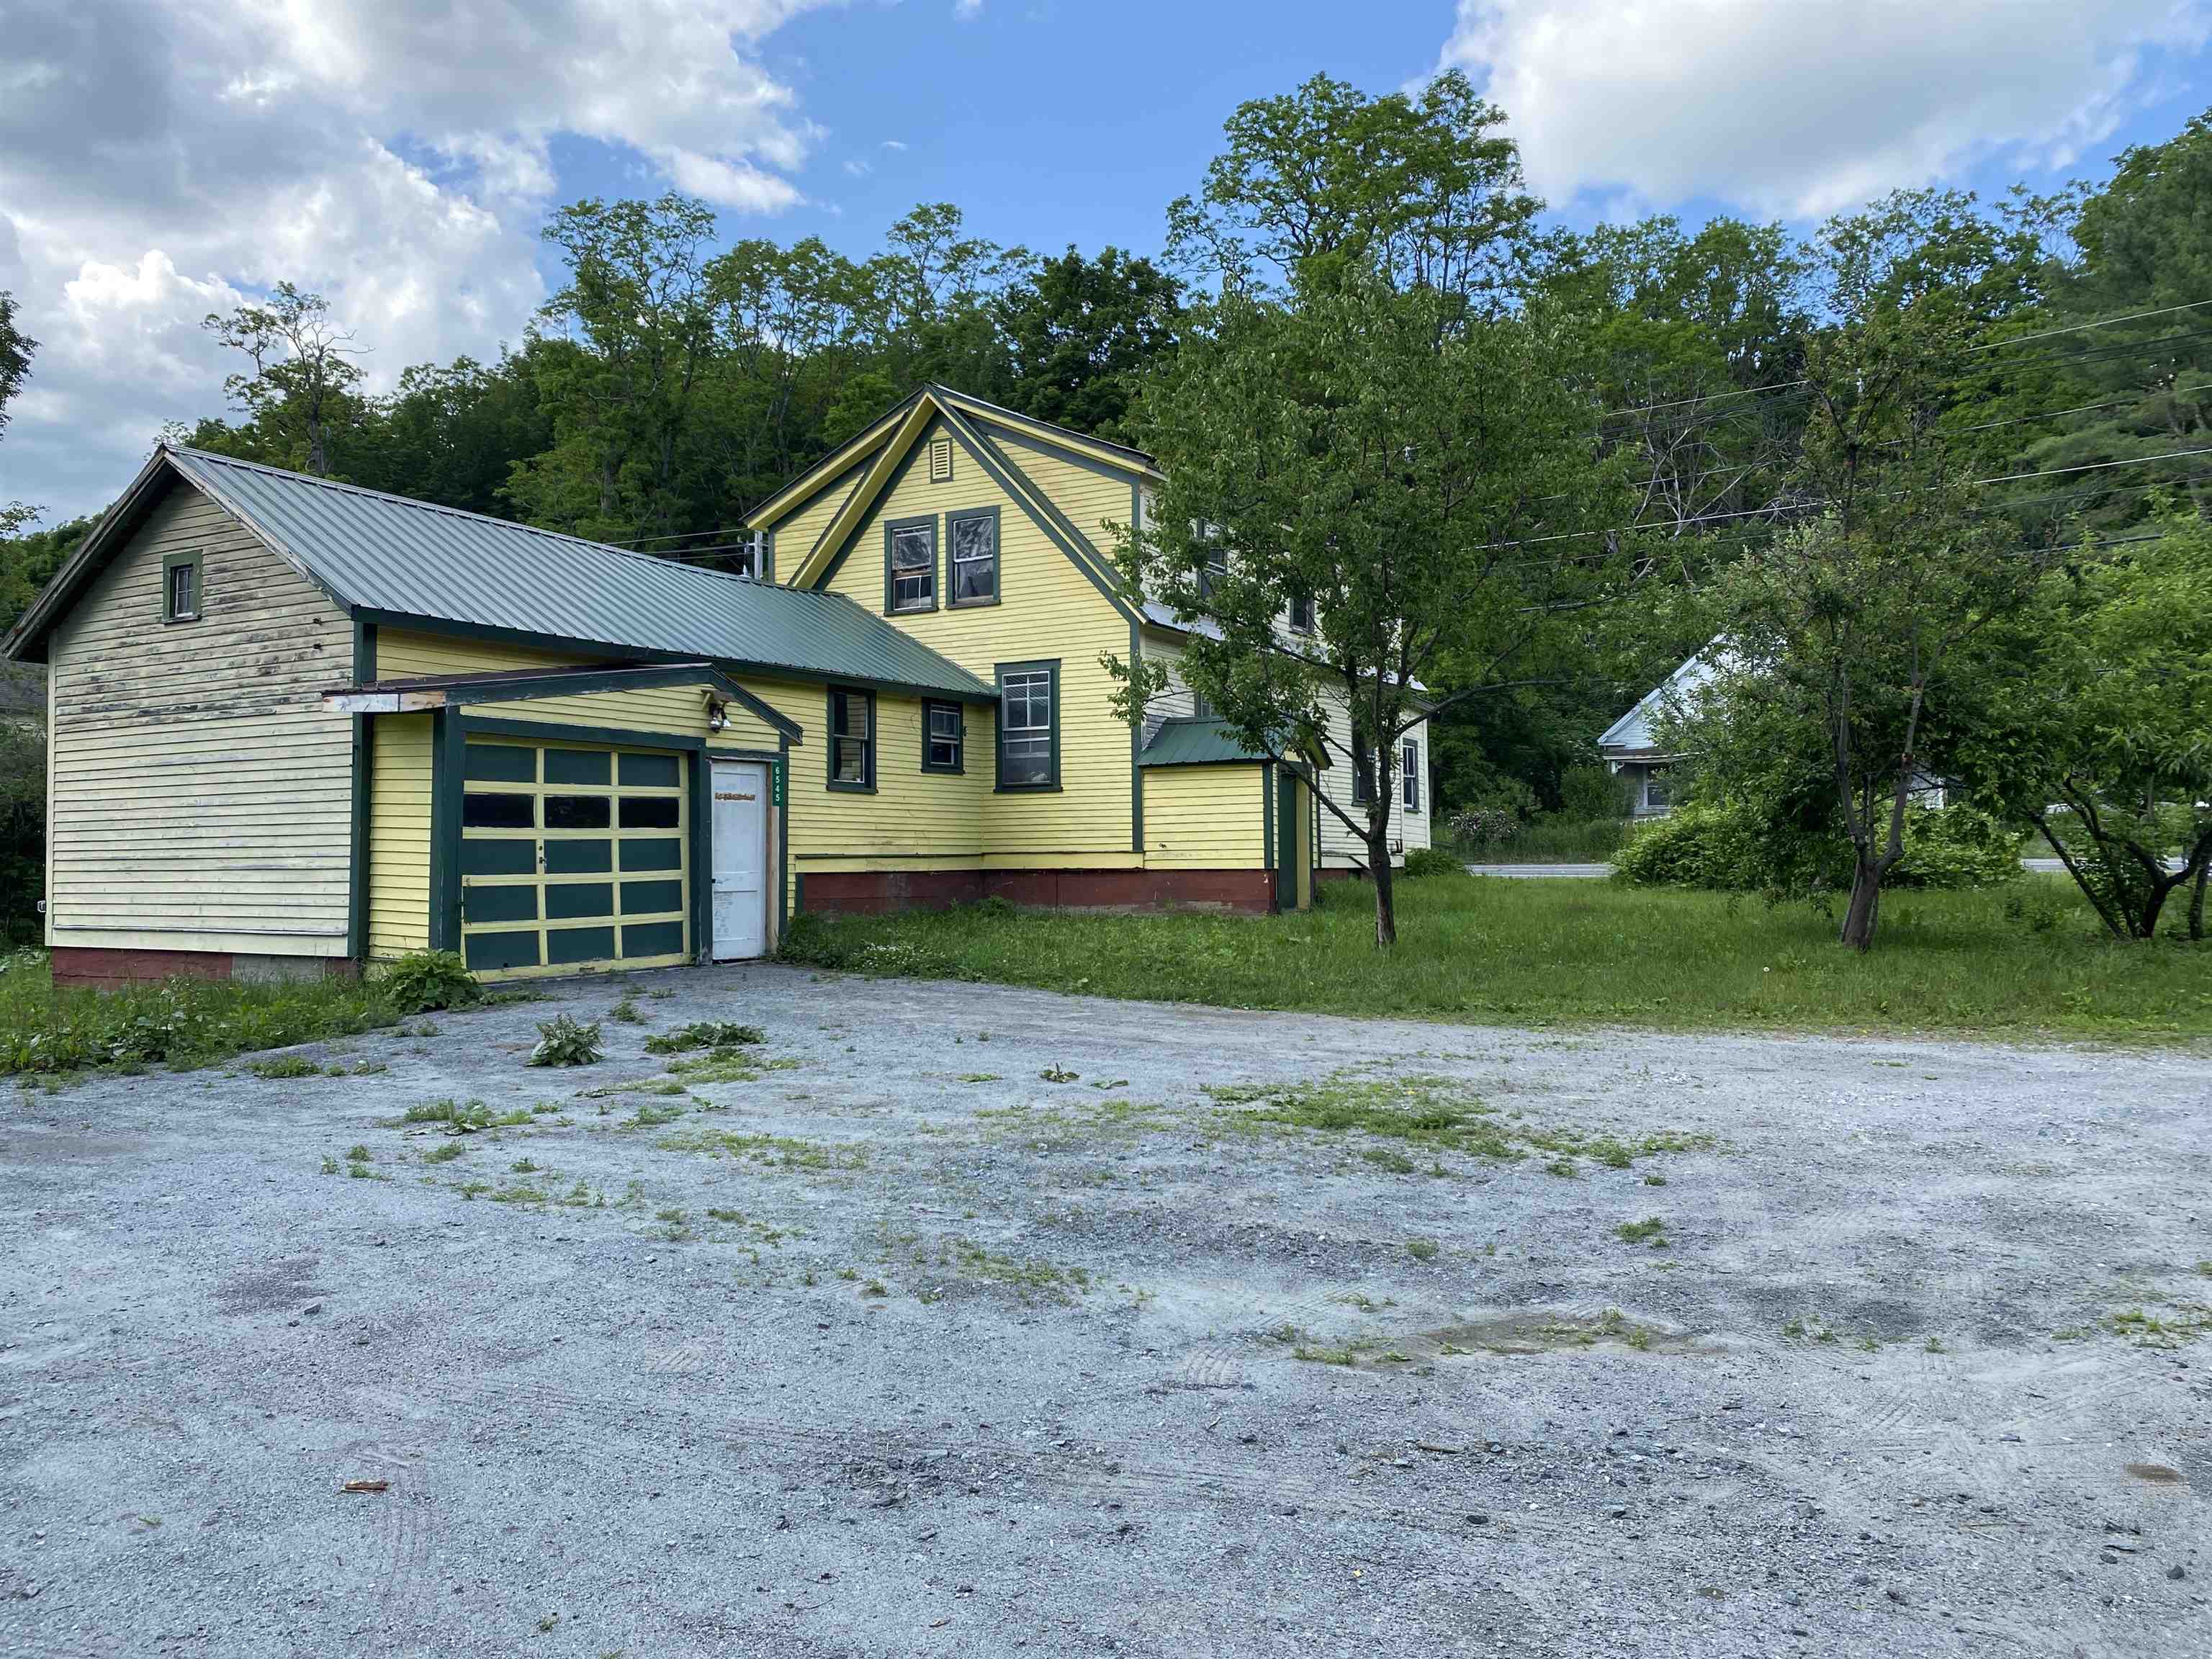 Townshend Vermont 4 bedroom home with small...